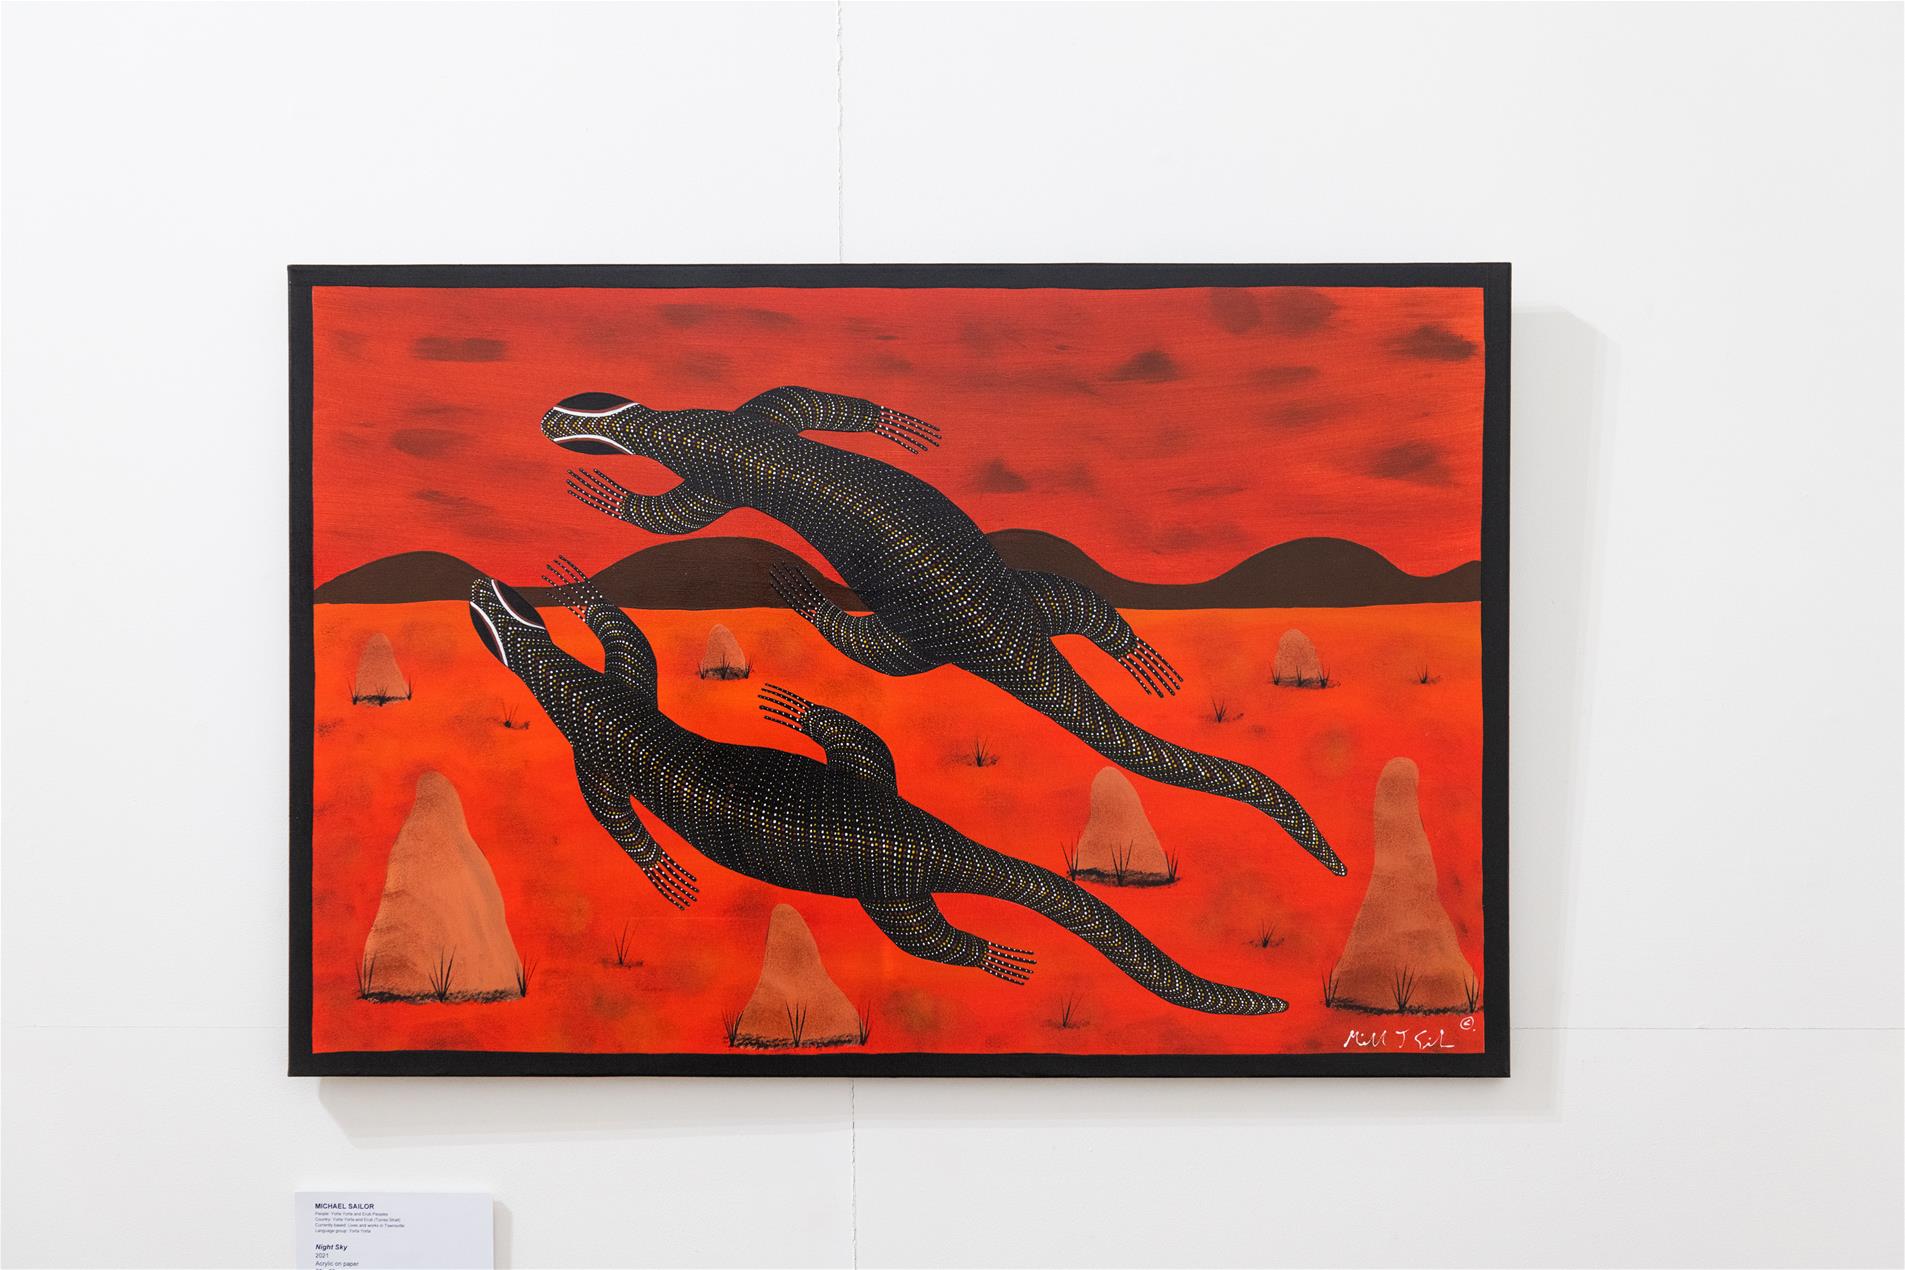 Two animals on a red desert background painted onto a canvas in a gallery.